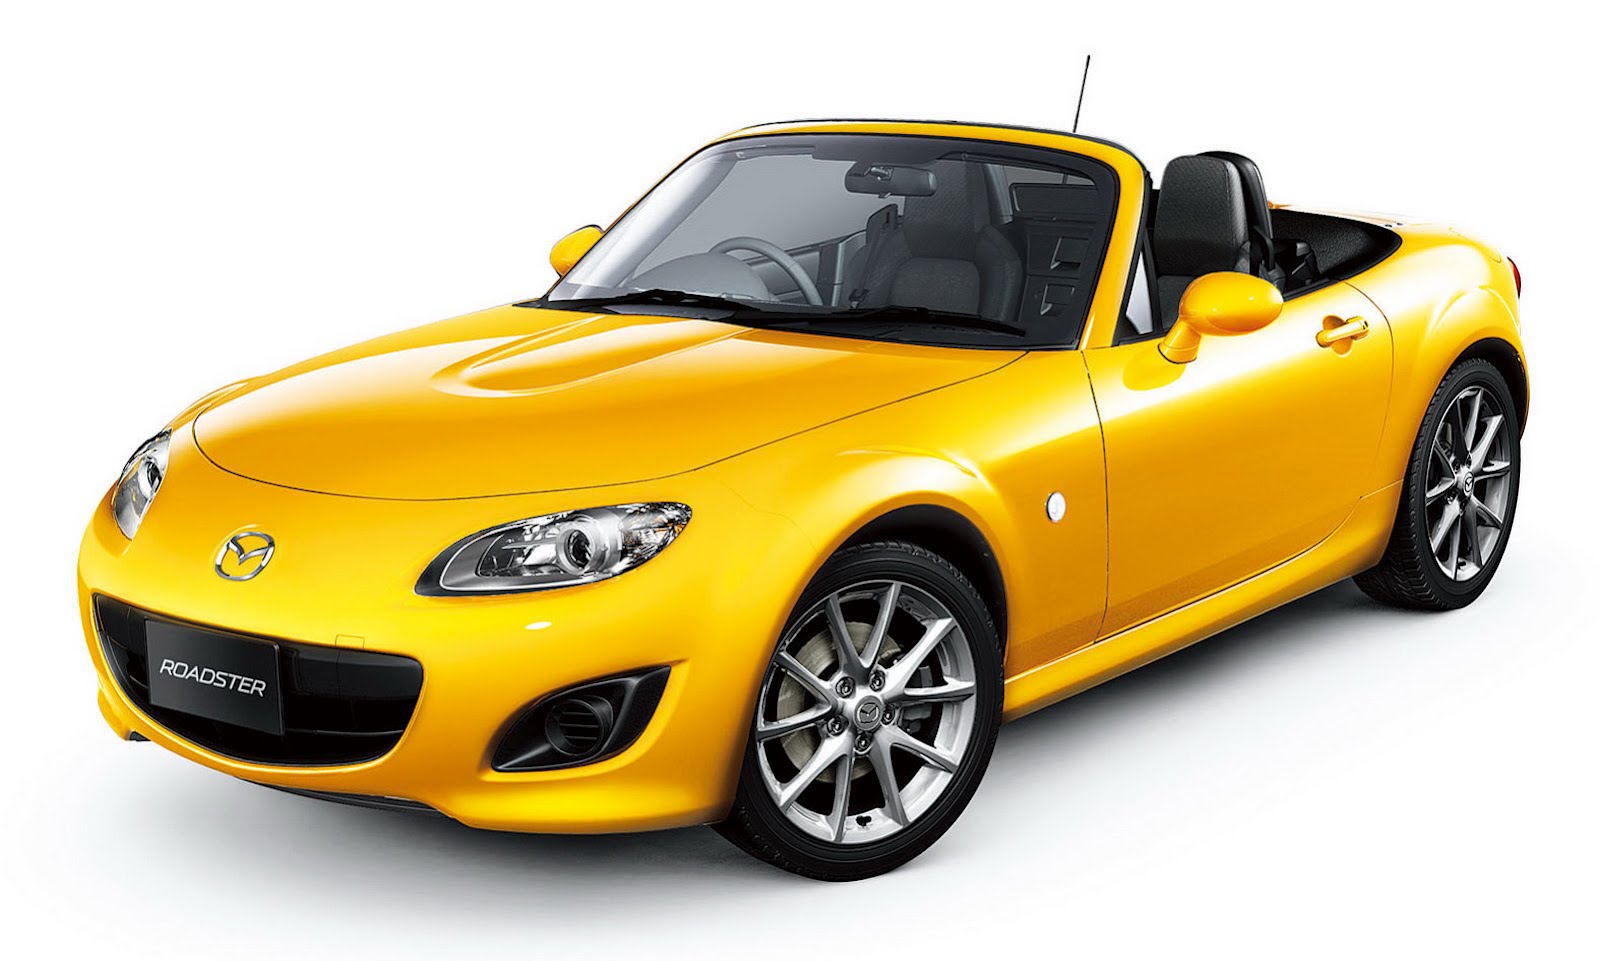 According to the plan, the next Mazda MX-5 and Alfa Romeo's successor to the